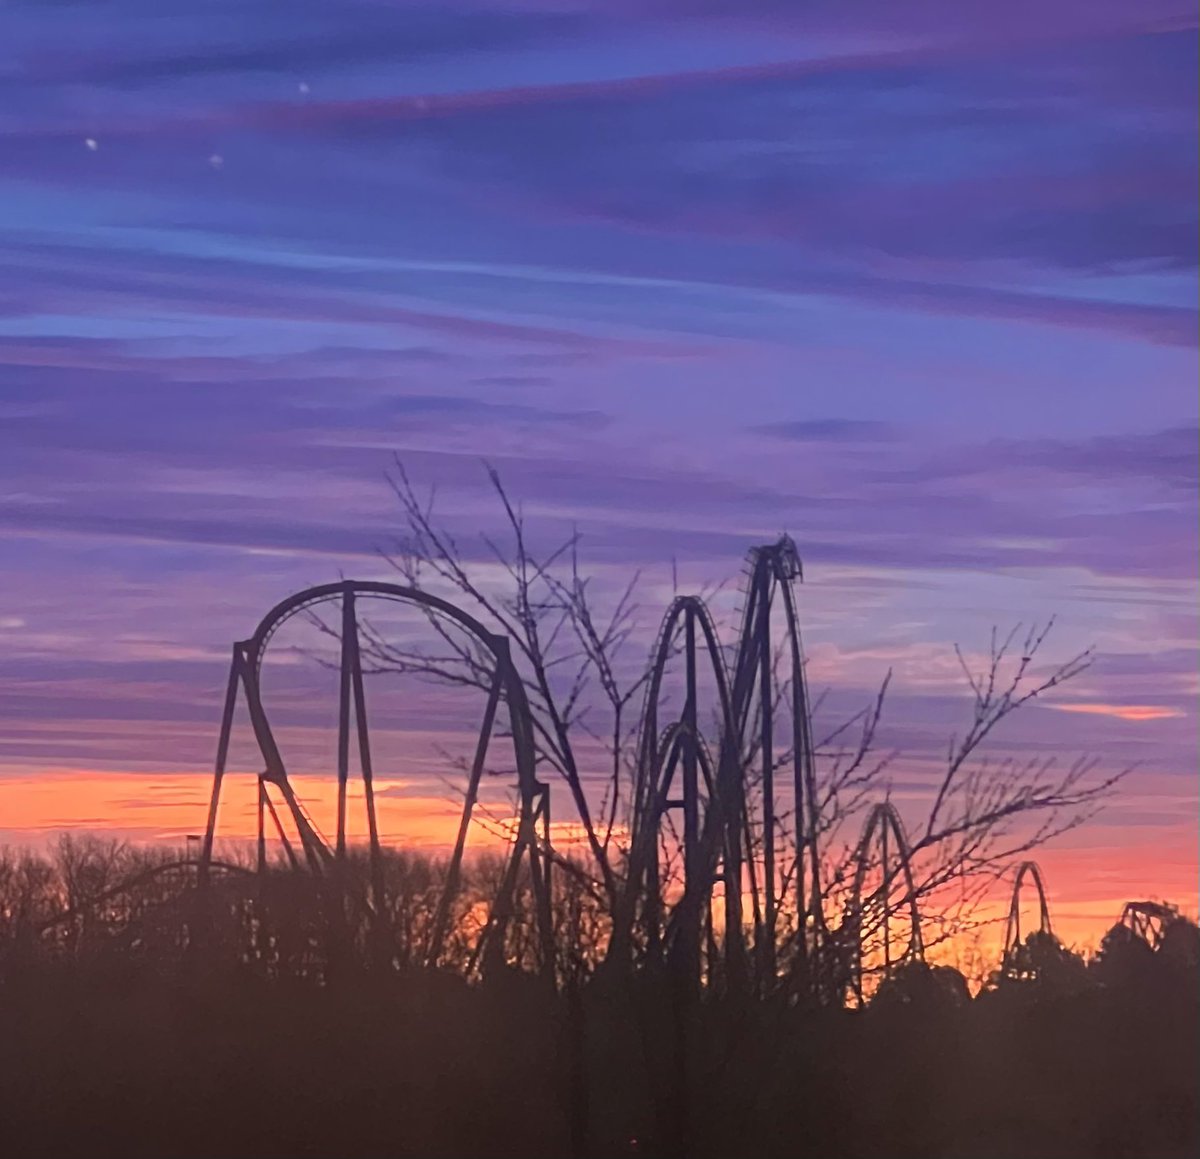 #tuesdayvibe #photography #photographers #photographer #photo #photogram #photographie #photos #thursdayvibes #quotes #quote #quoteoftheday ##sunrise #Rollercoaster 📸 'Life is like a roller coaster. It has its ups and downs. But it's your choice to scream or enjoy the ride'